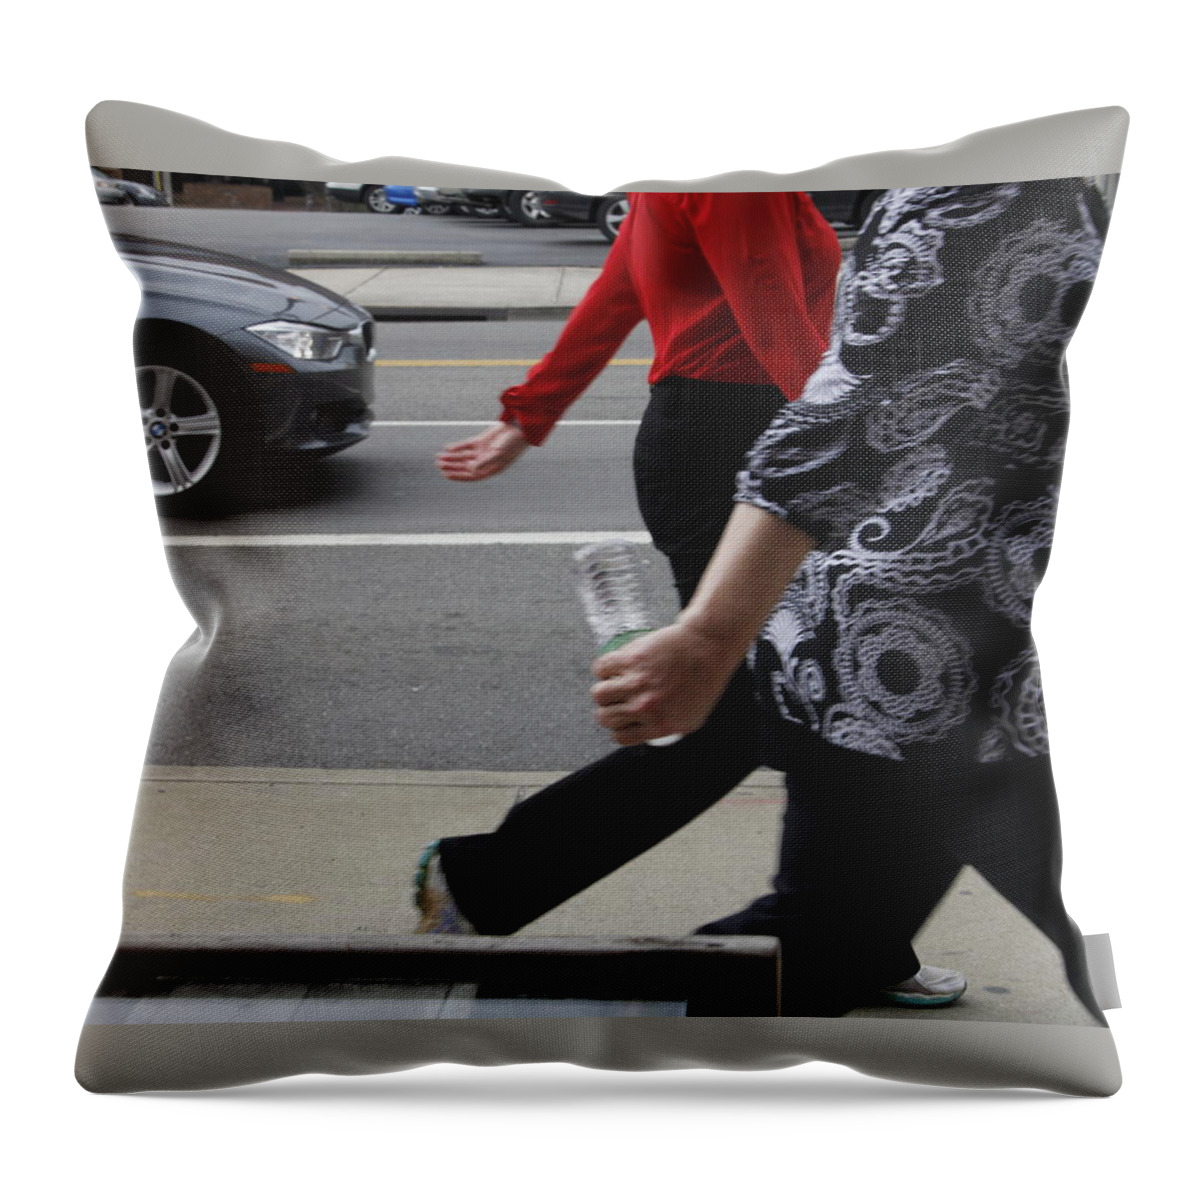 Walking Throw Pillow featuring the photograph In Step by Valerie Collins